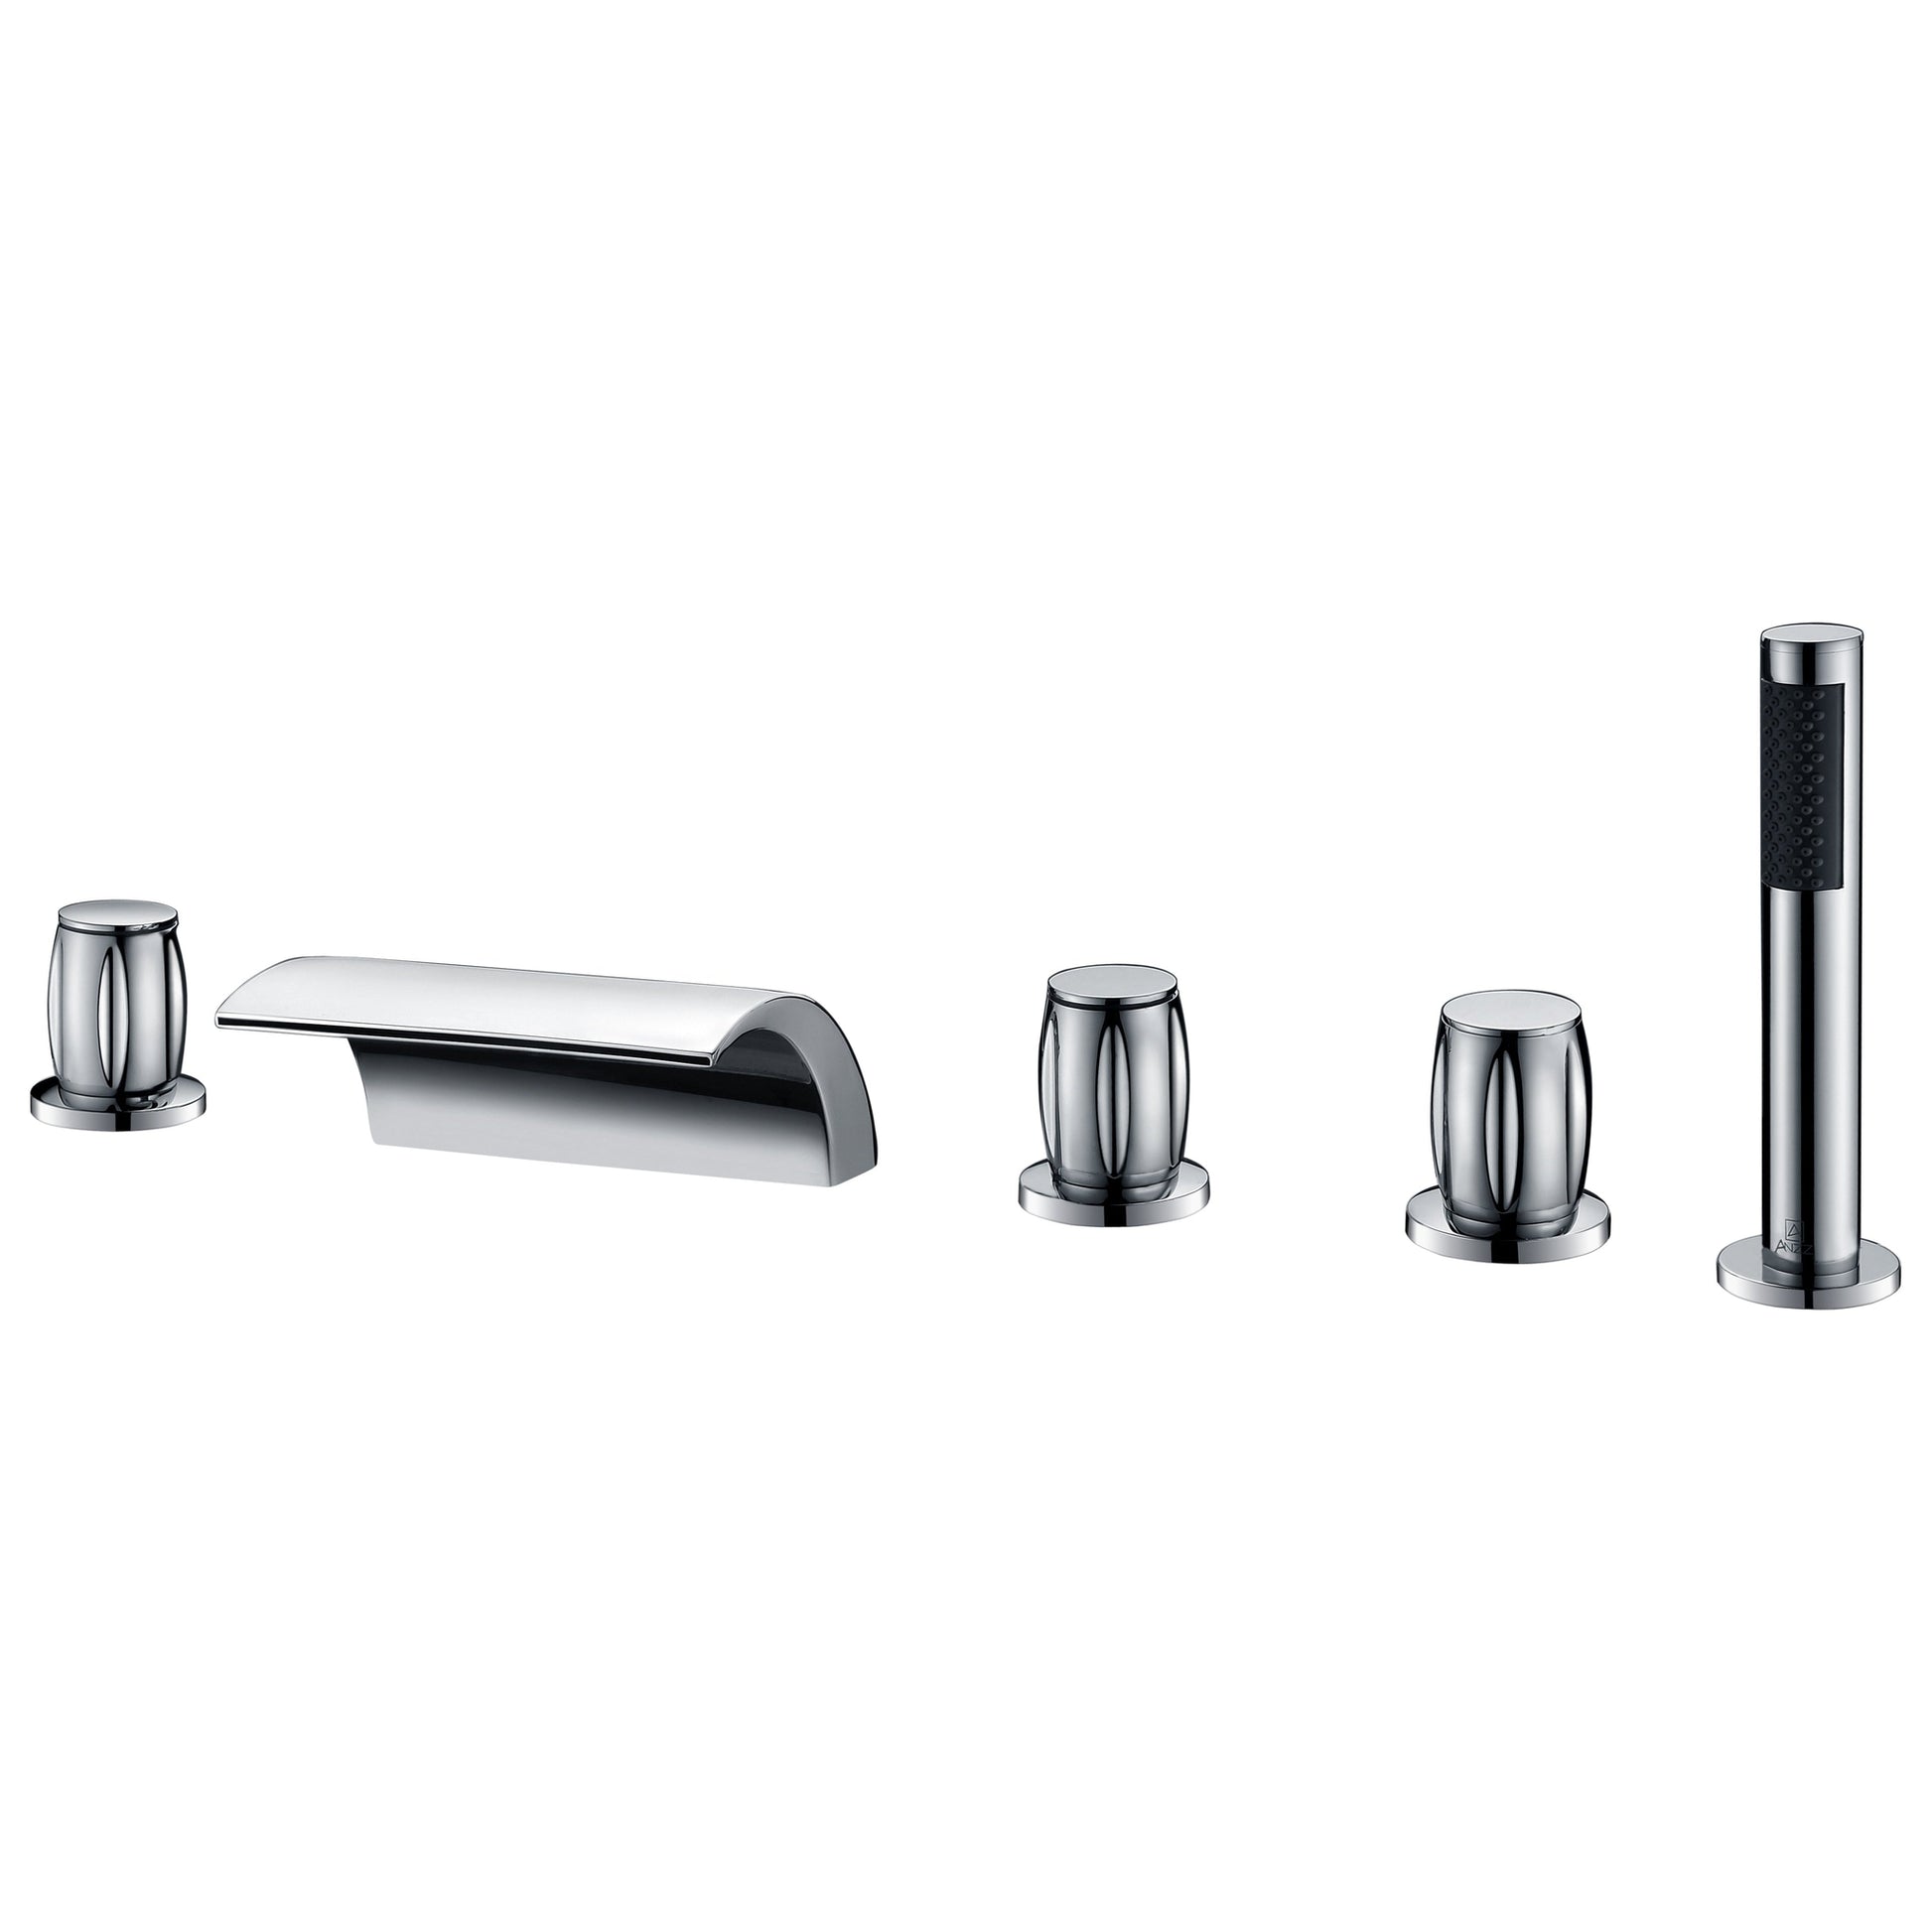 ANZZI Della Series 3-Handle Polished Chrome Waterfall Spout Roman Tub Faucet With Euro-Grip Handheld Sprayer